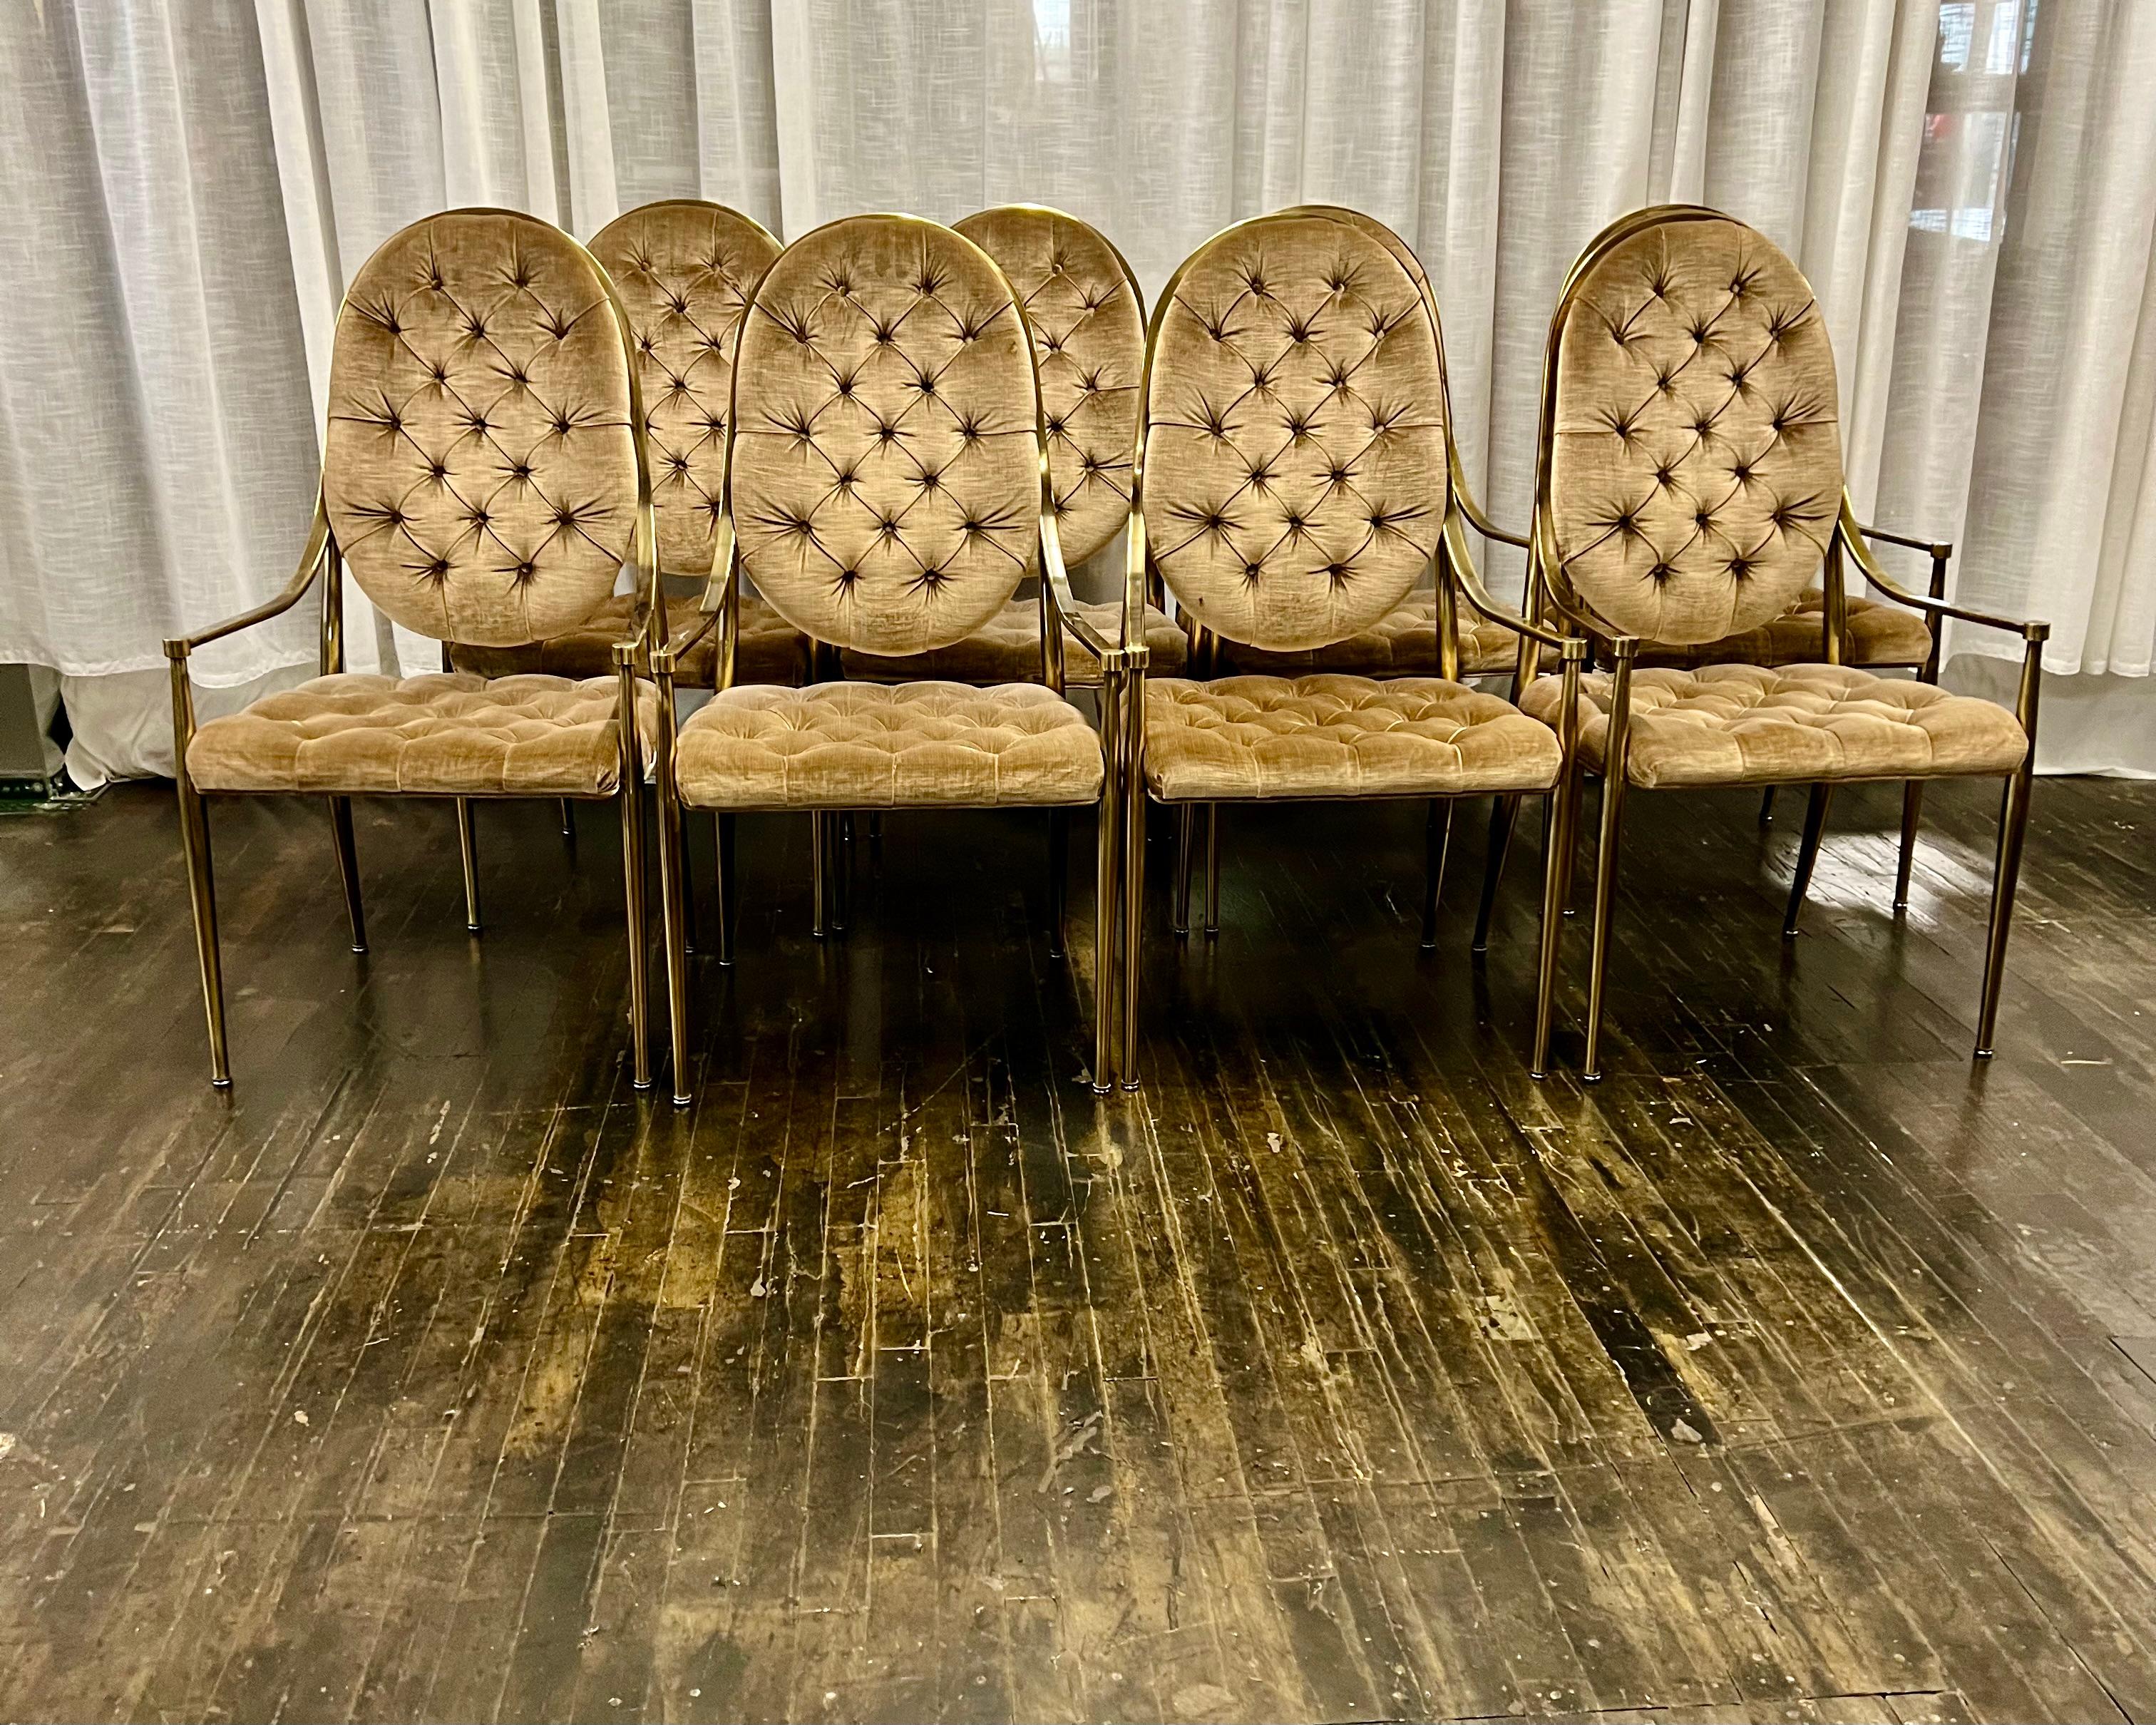 A stunning set of eight mid-century brass Mastercraft dining chairs.  These chairs feature antiqued brass frames with arms and gorgeous tufted velvet upholstery. The chairs have their original upholstery which seems to be a shade of bronze (perhaps